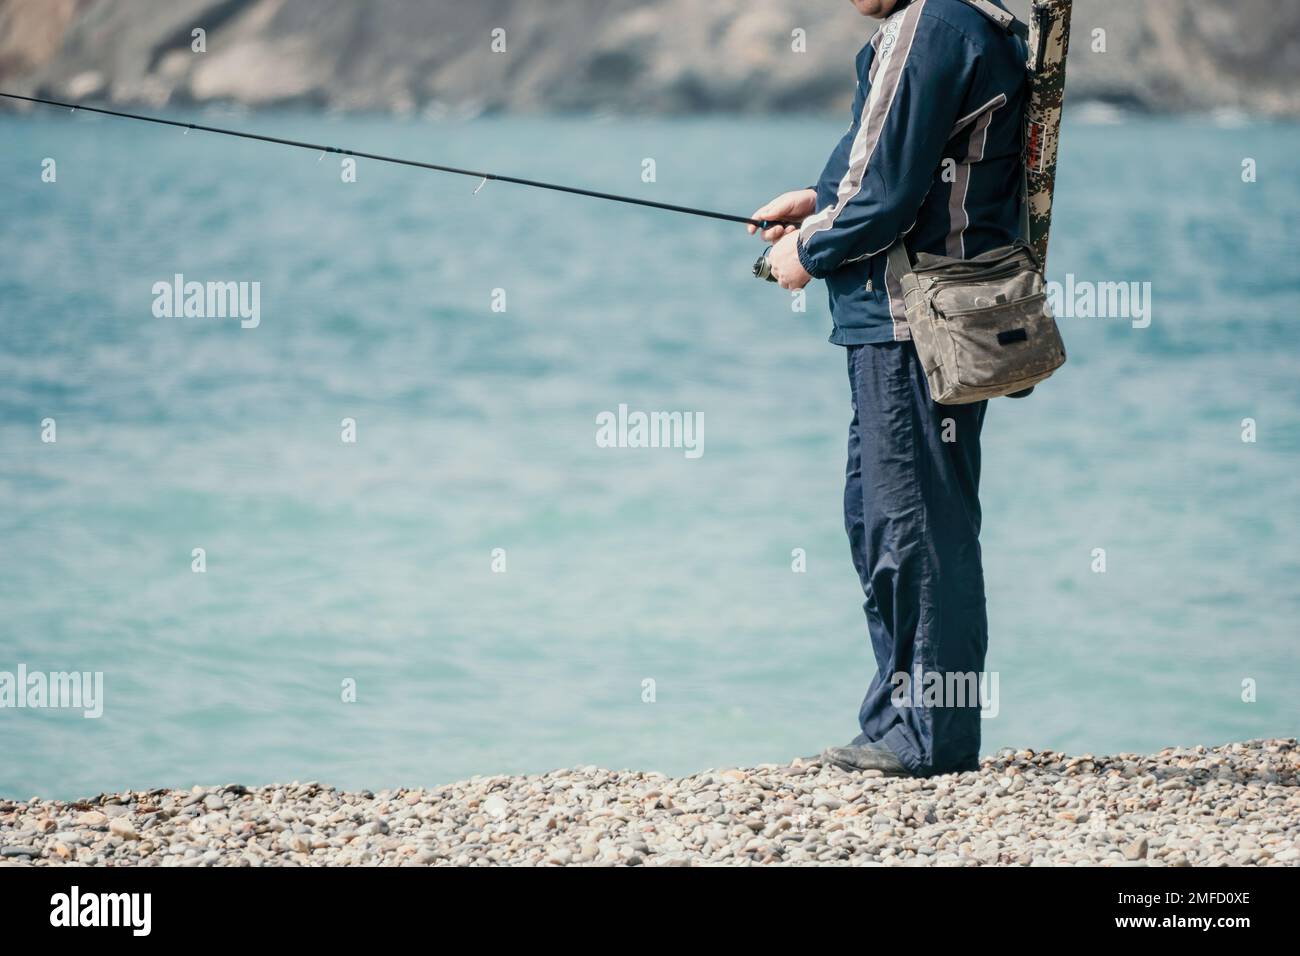 Man hobby fishing on sea tightens a fishing line reel of fish summer. Calm surface sea. Close-up of a fisherman hands twist reel with fishing line on Stock Photo